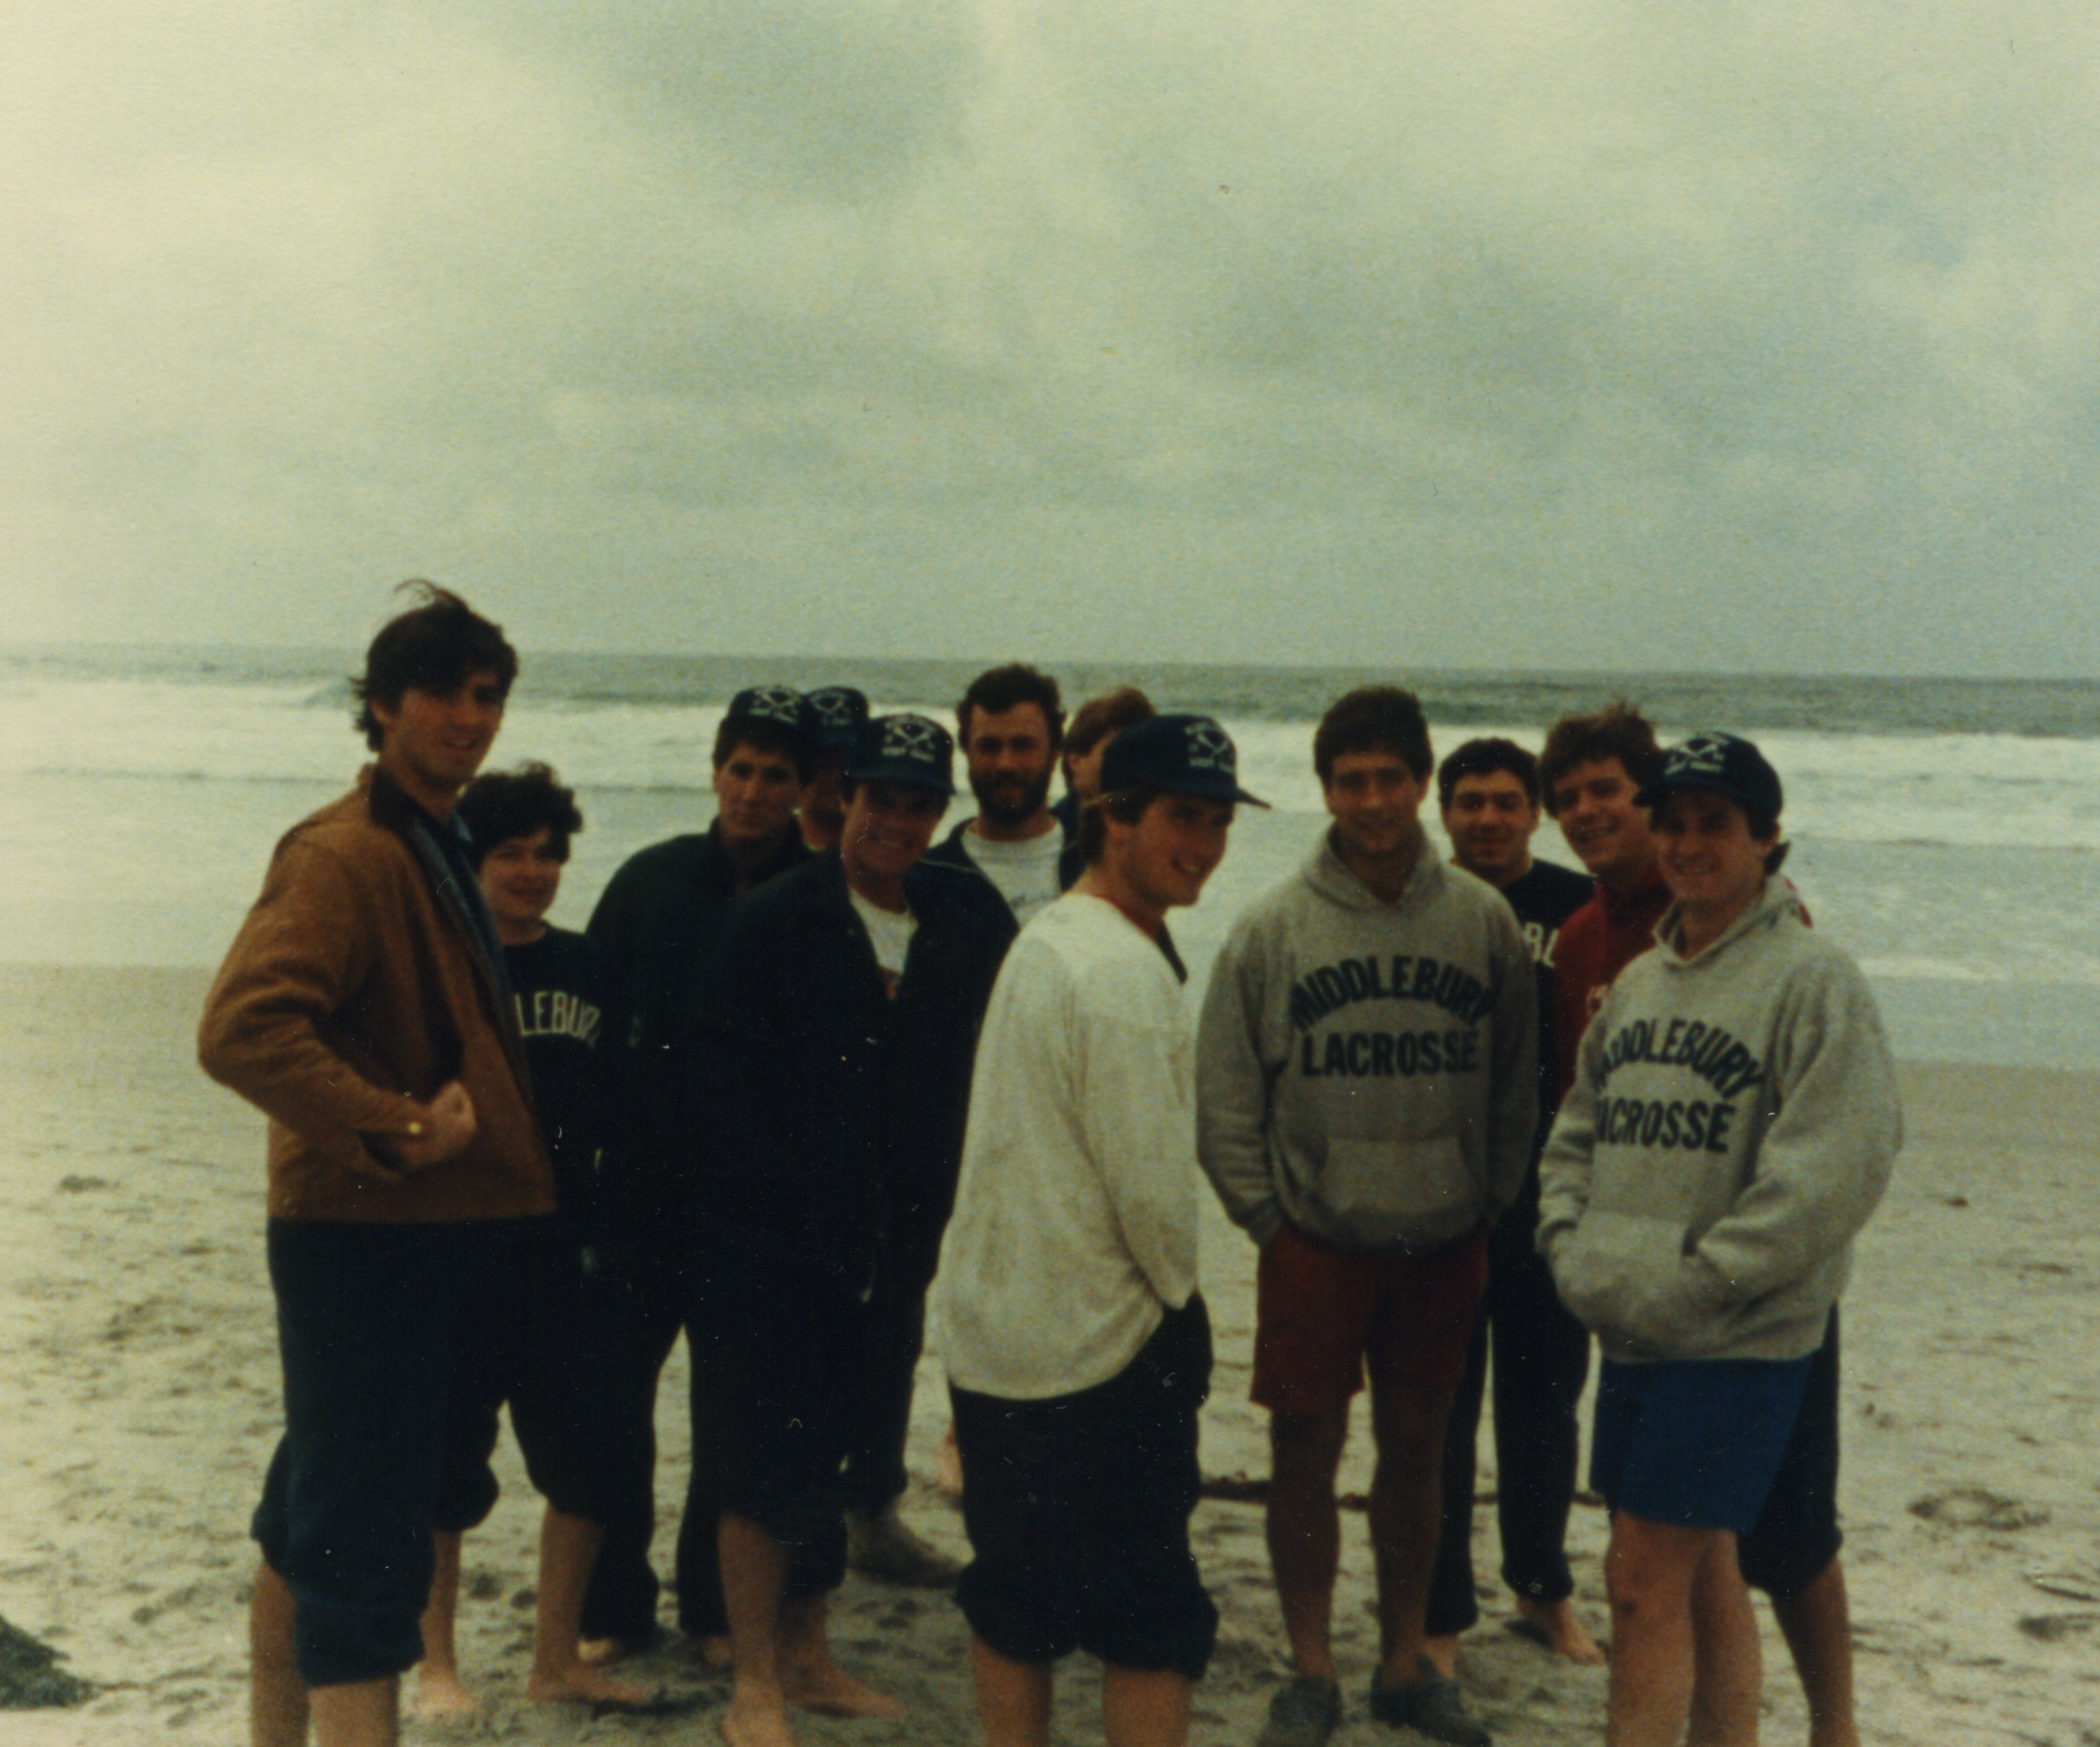 1984-team-west-coast-trip-at-beach-special-collections